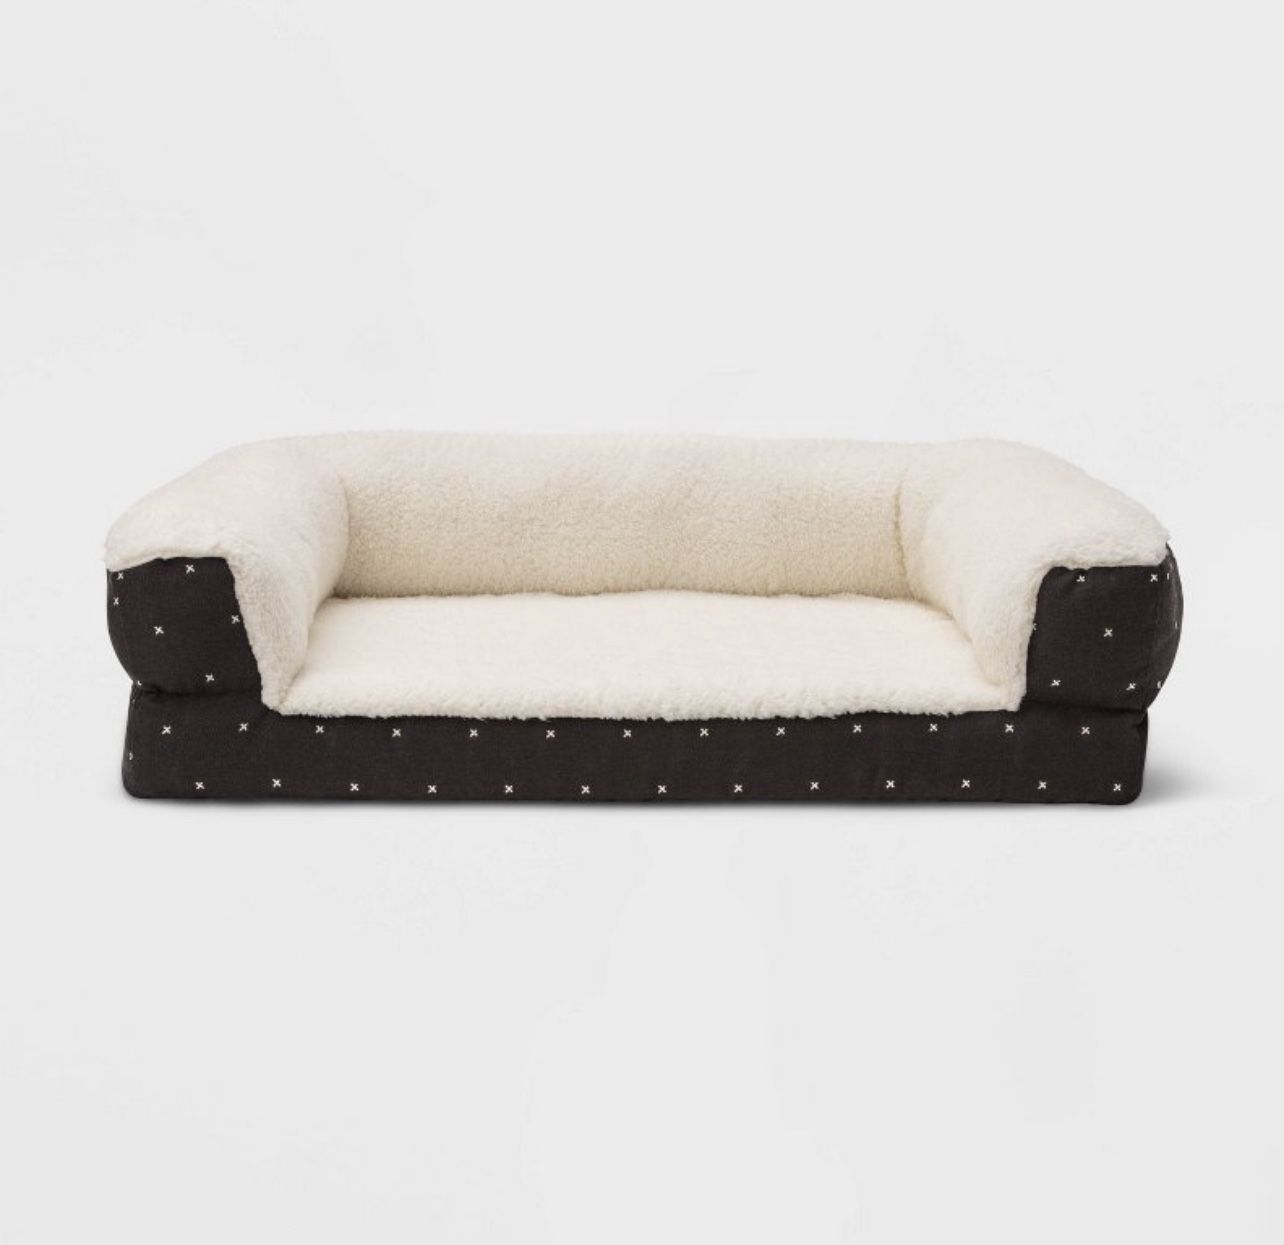 Modern Slant Couch Dog Beds - M - Boots & Barkley